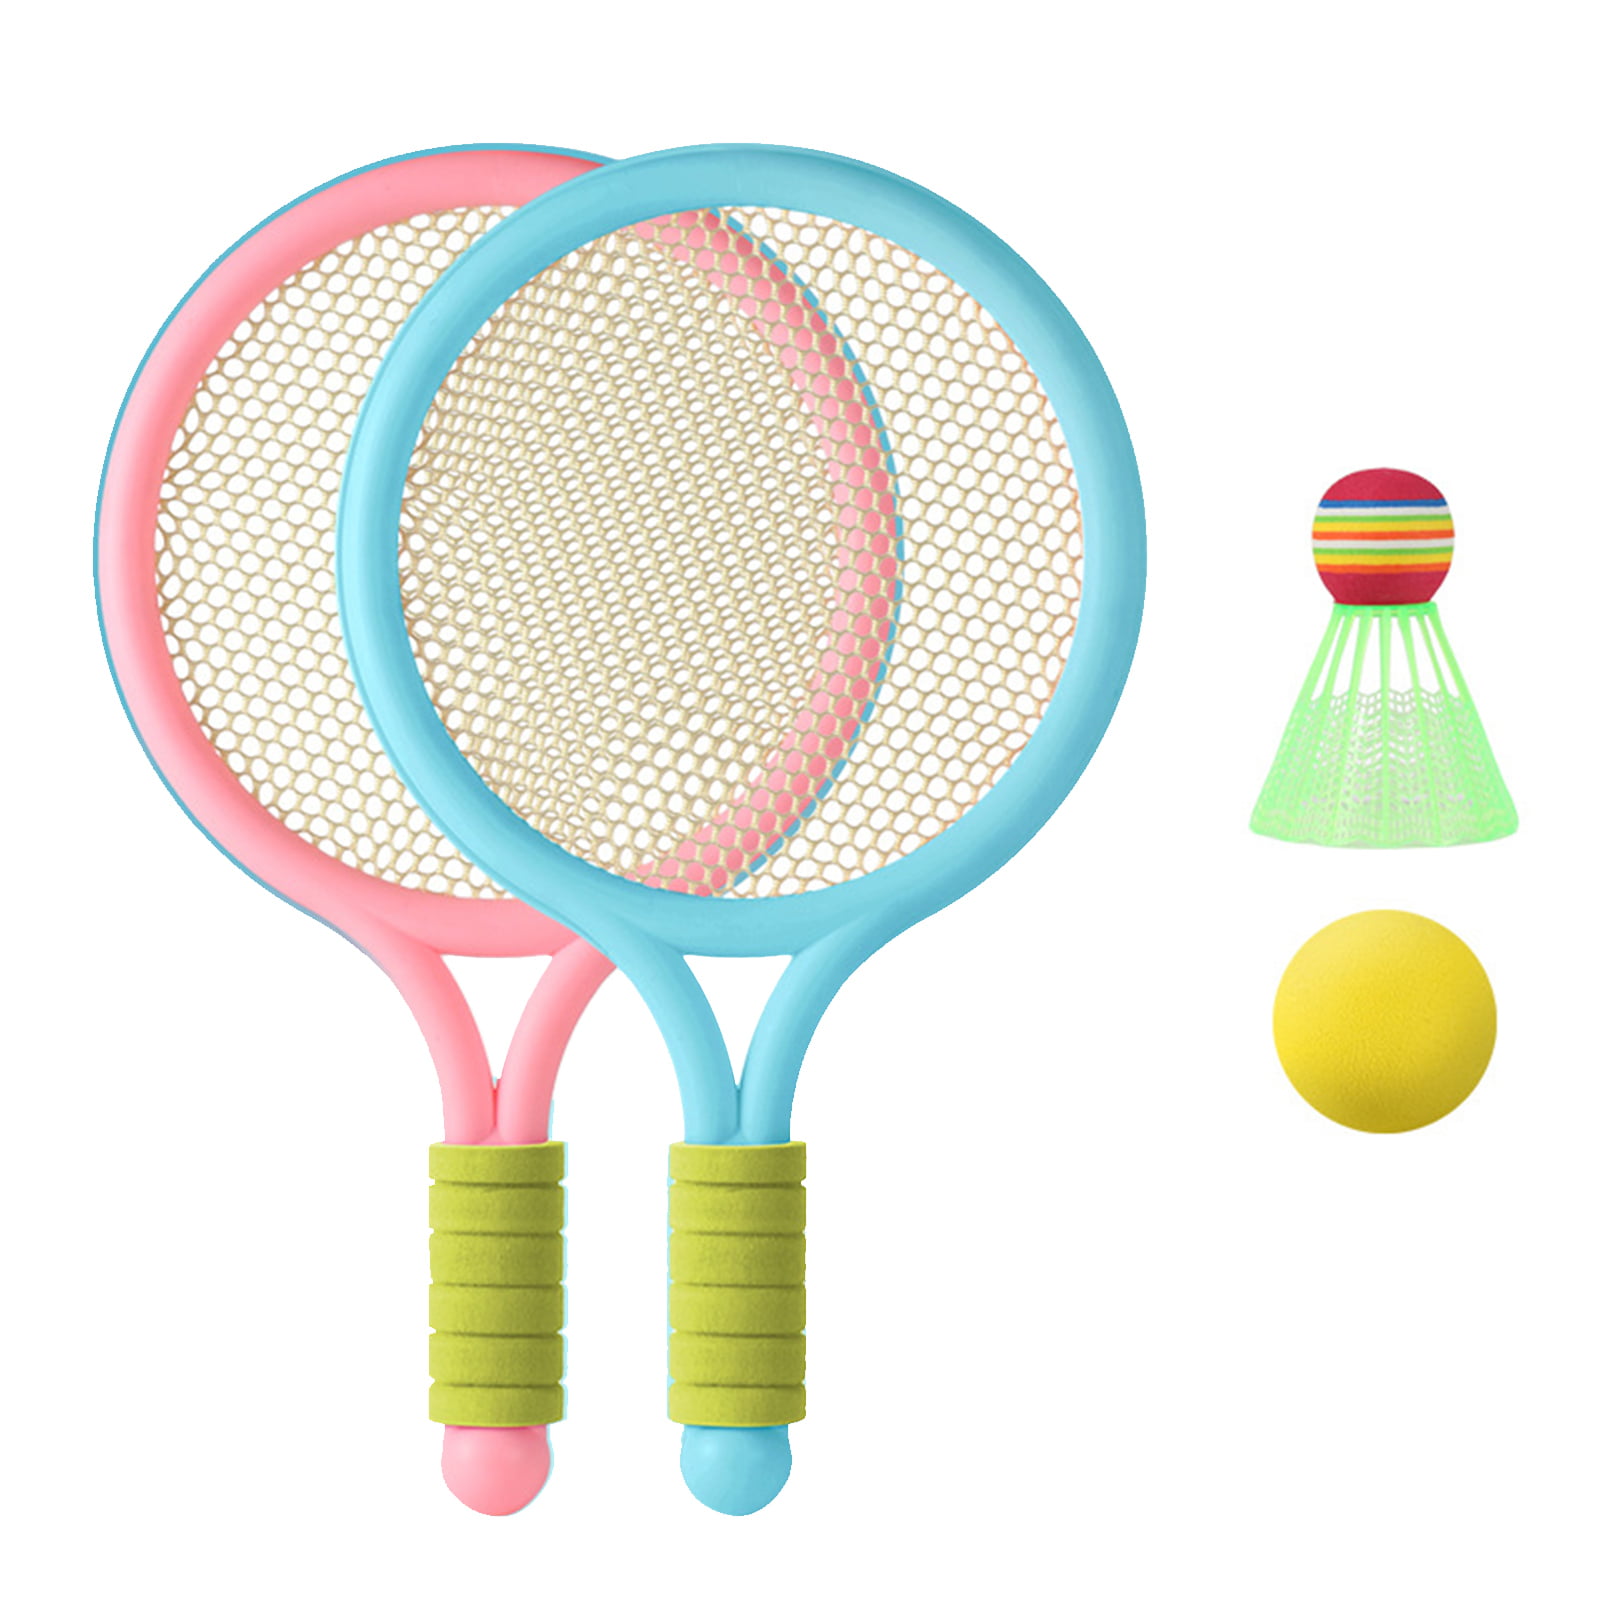 Badminton Rackets Set of 4 for Backyard Sports Adults Kids Family Racquets Game with 12 Shuttlecocks,4 Replacement Grips,4 Wristbands and Carrying Bag 